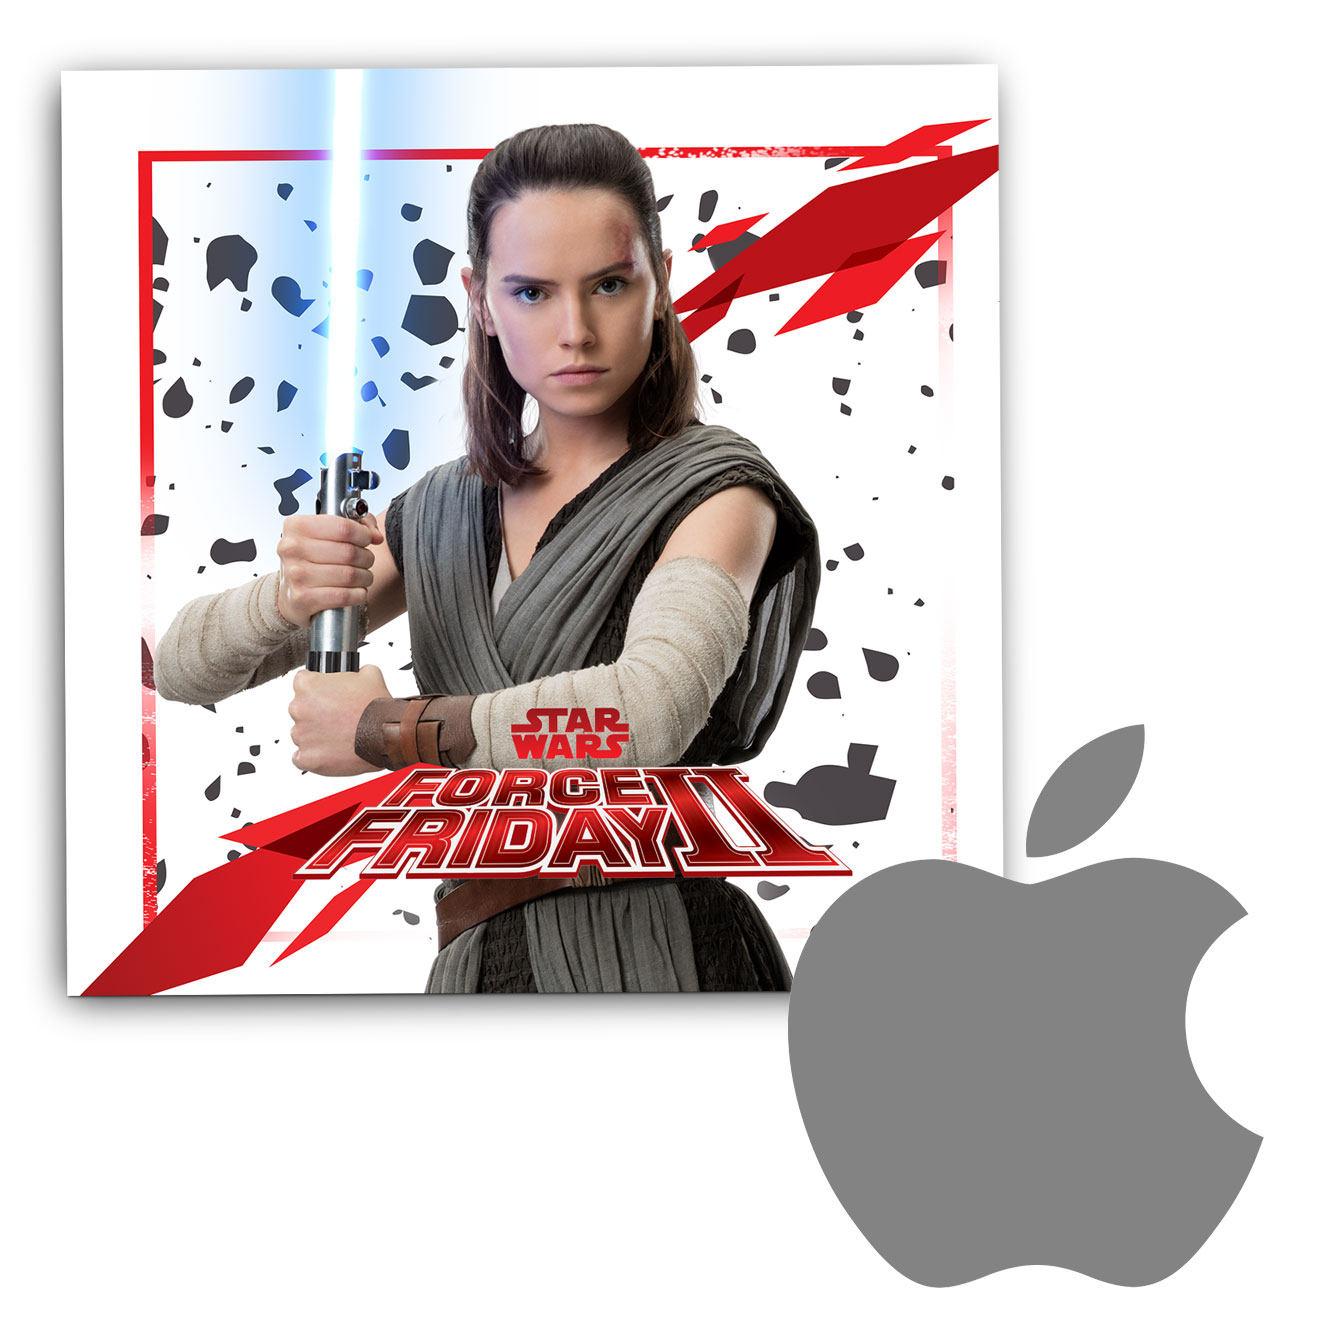 instal the last version for apple Star Wars: The Rise of Skywalker